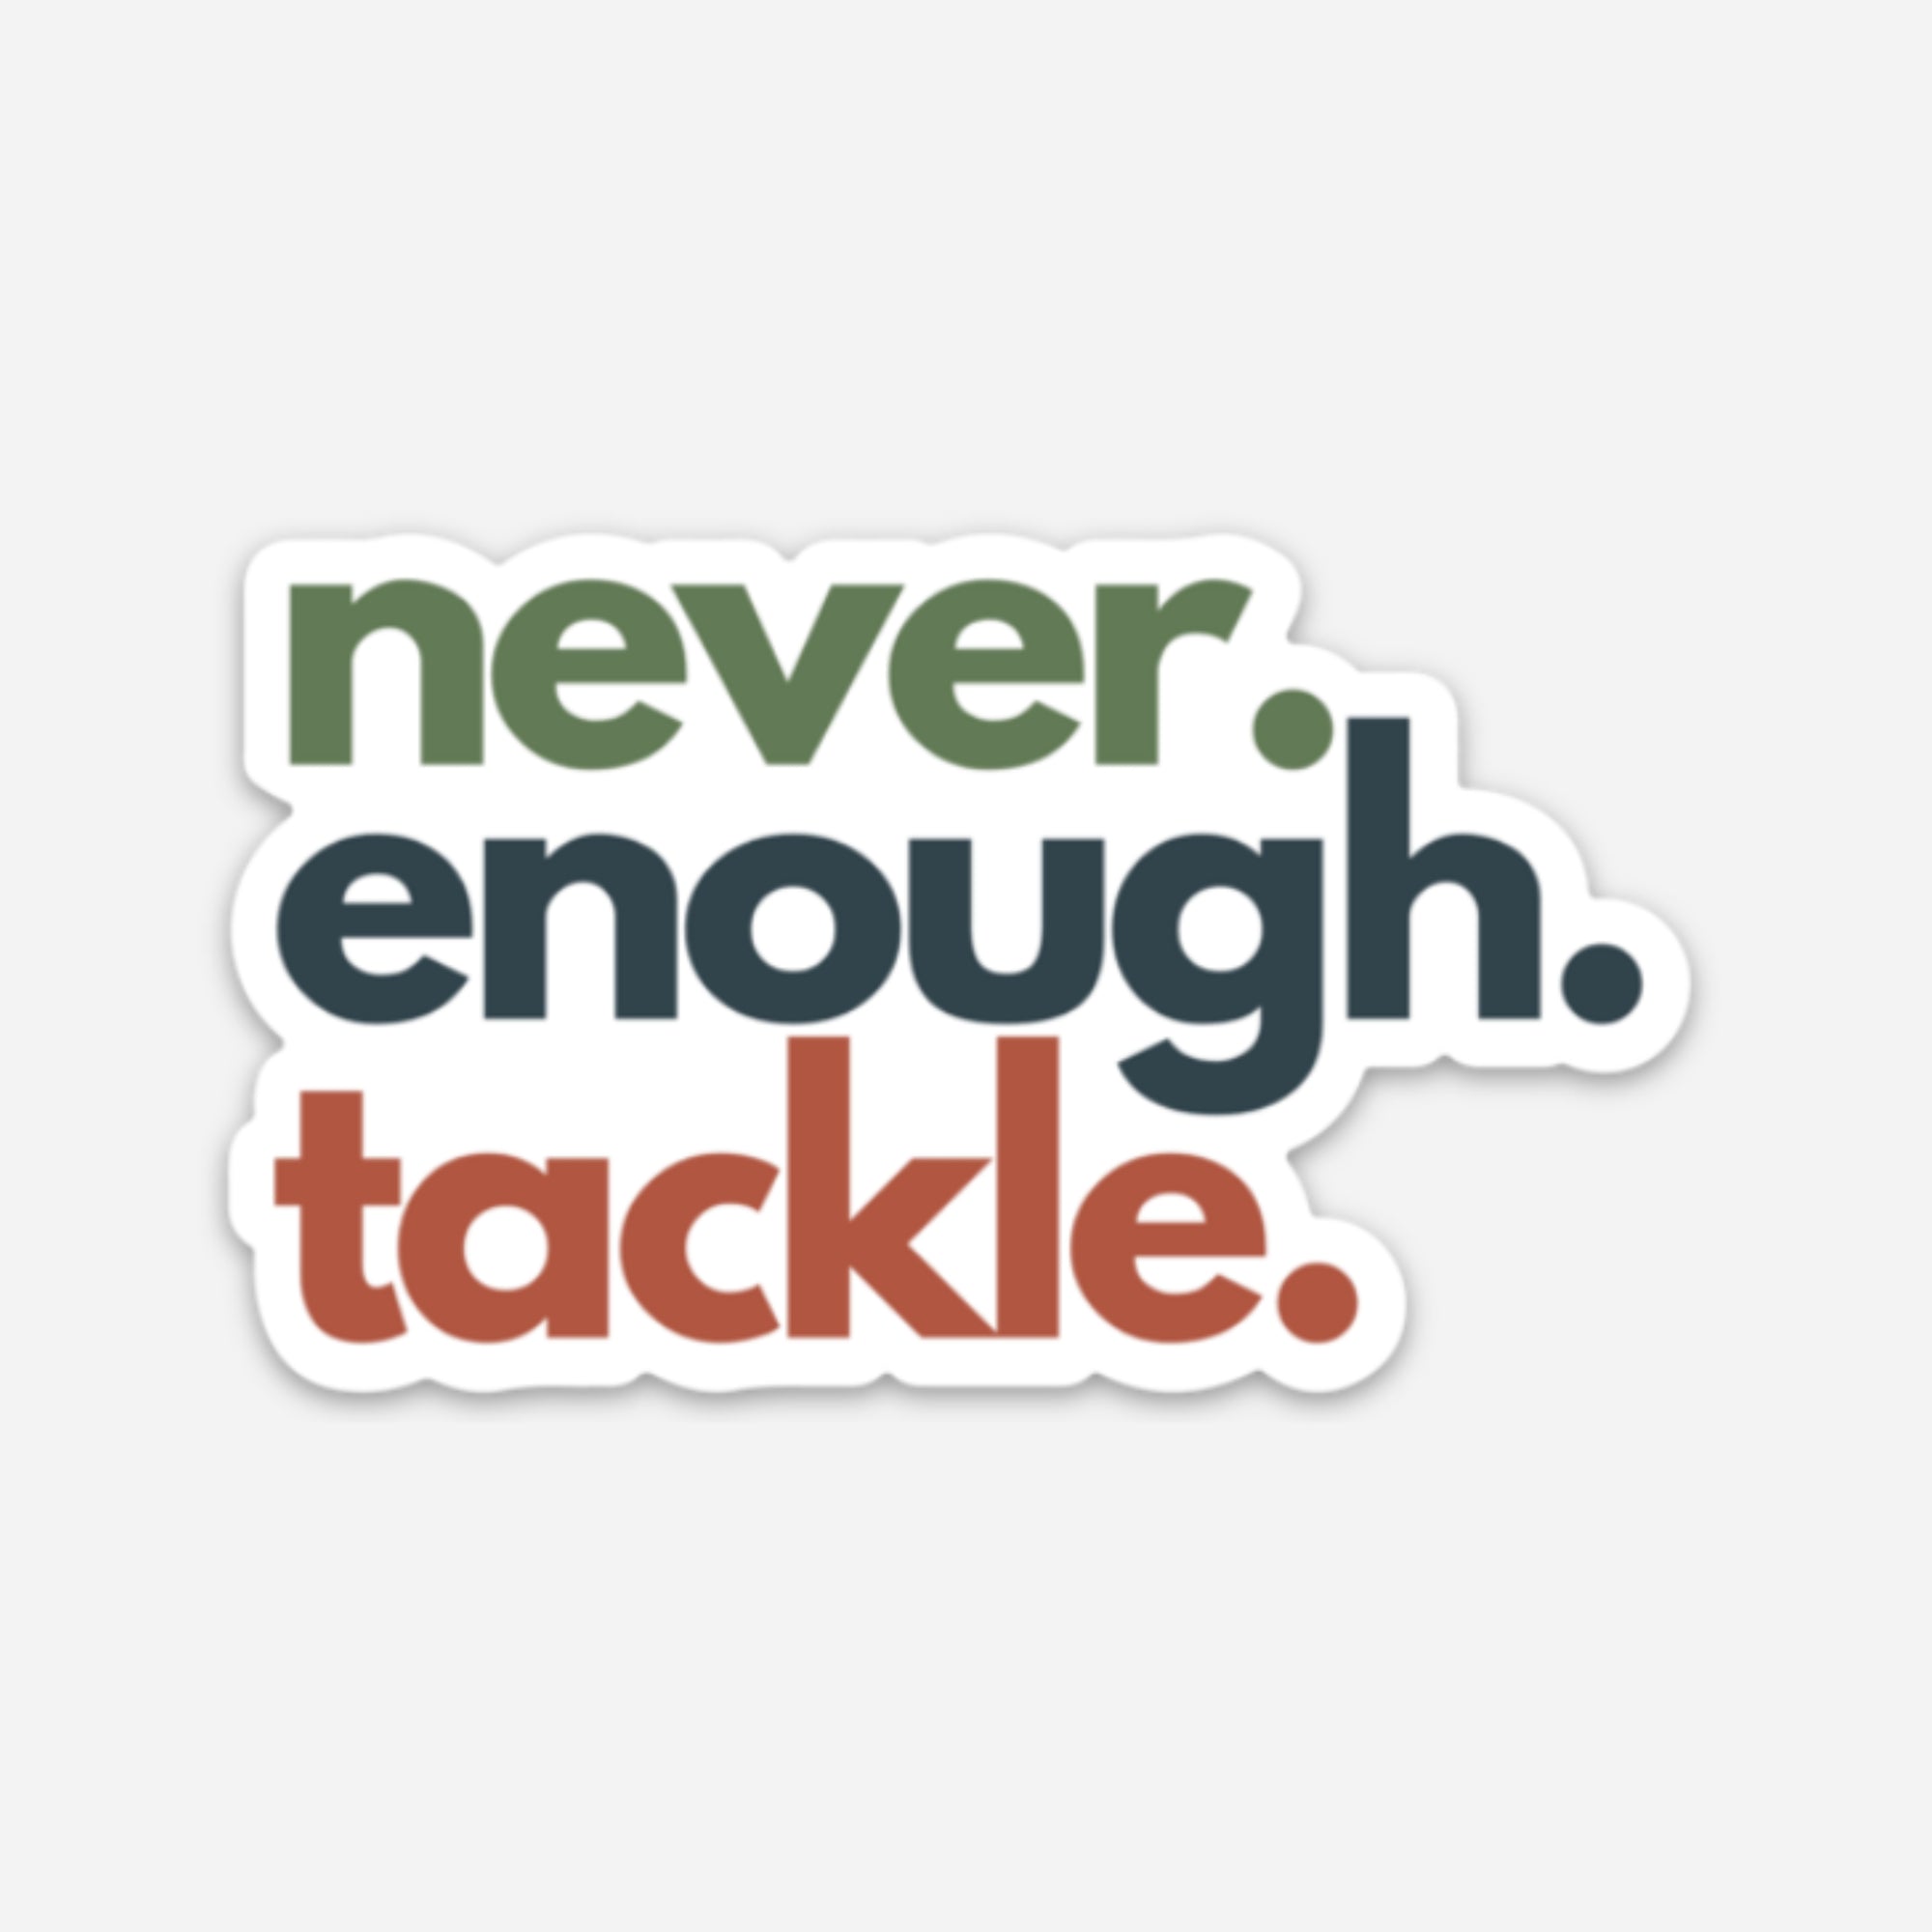 Never. Enough. Tackle.